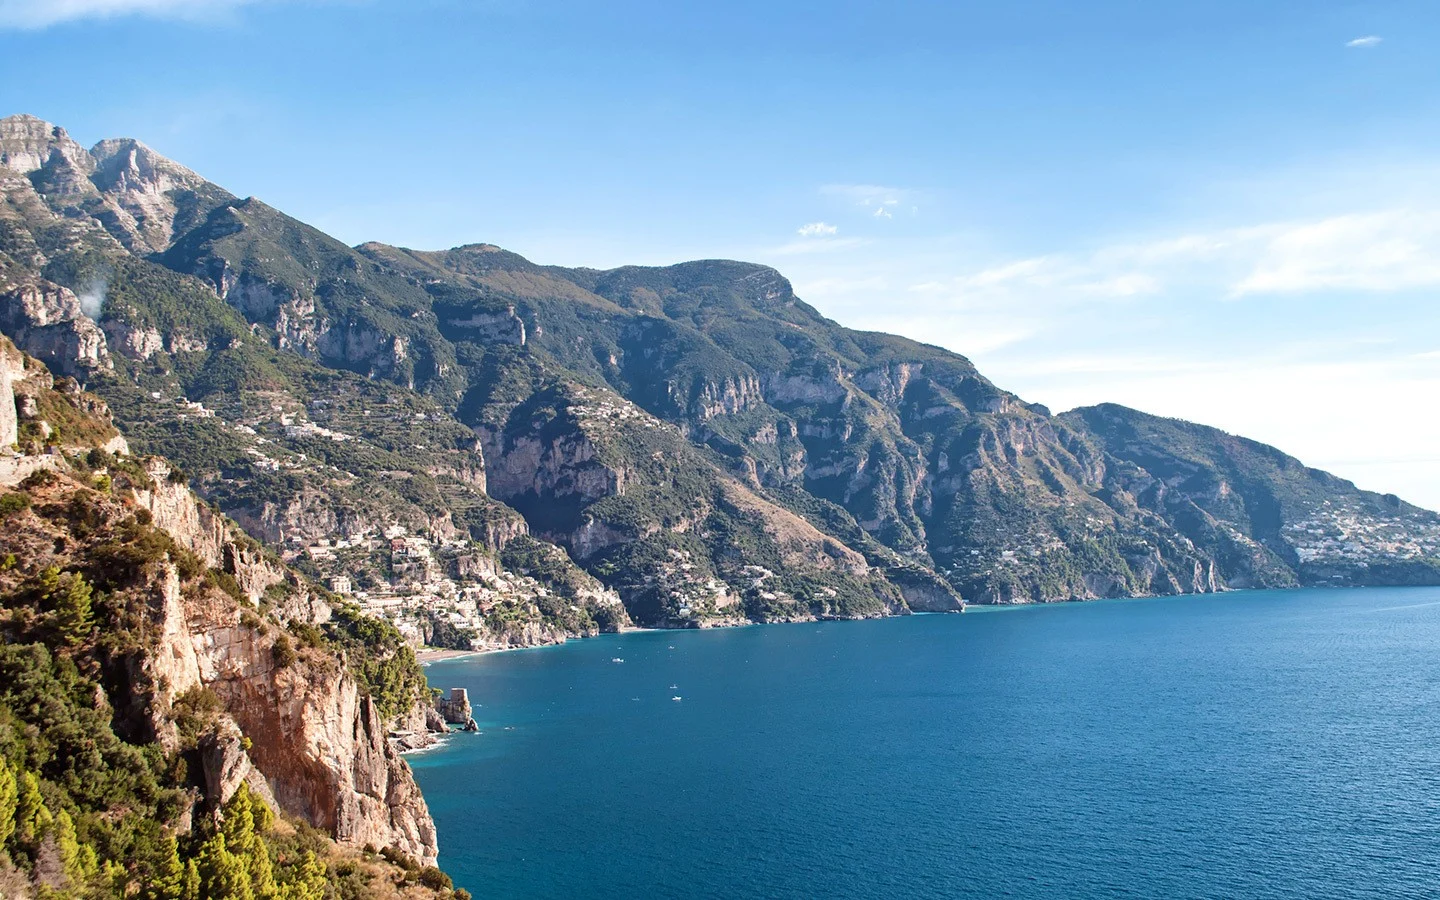 Views down the Amalfi Coast from the SS163 highway